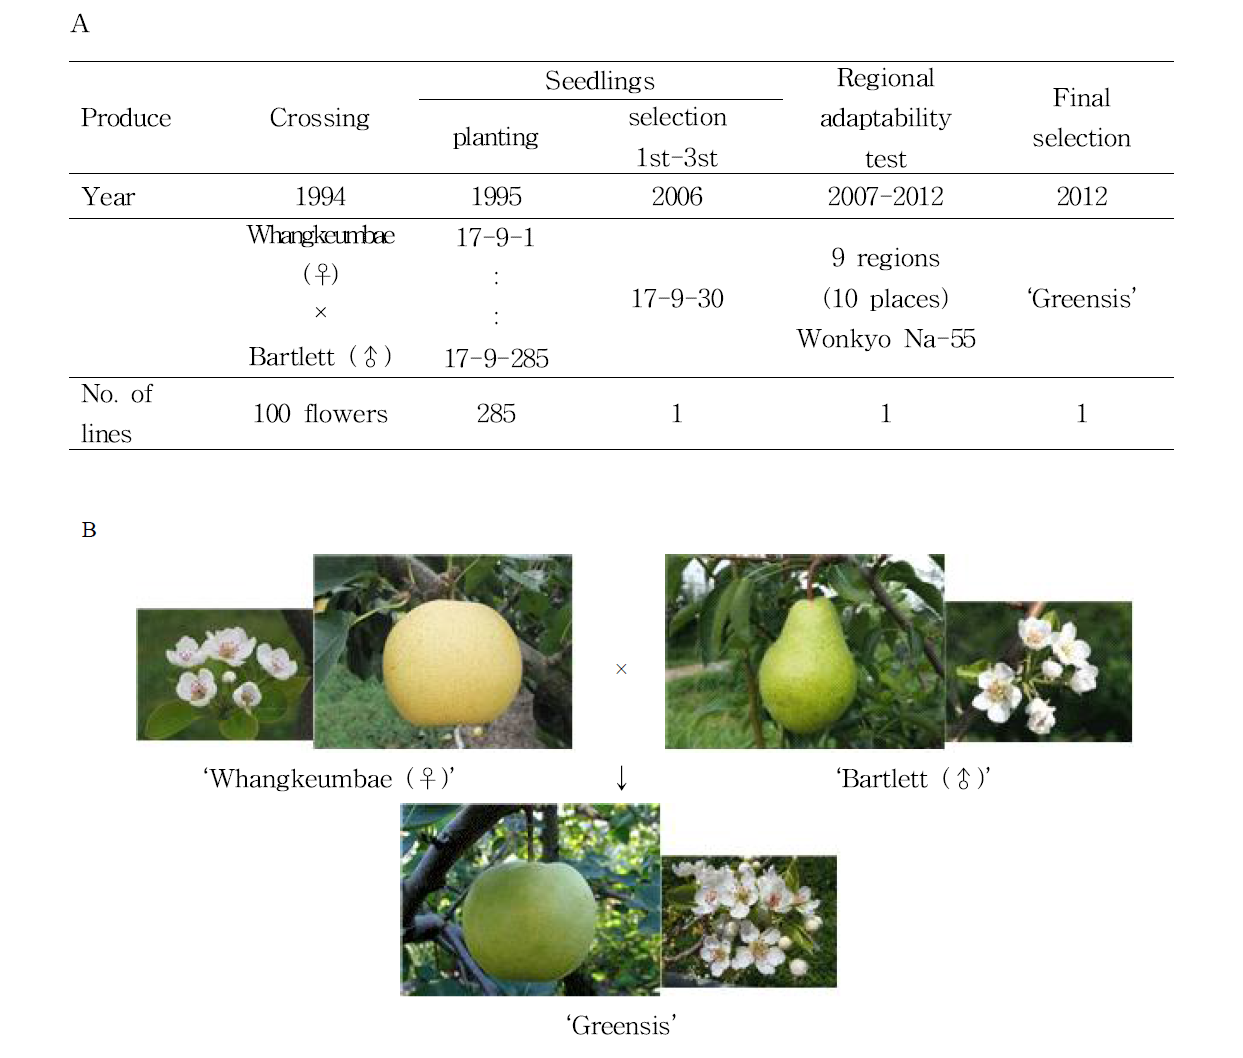 Pedigree diagram of ‘Greensis’ pear (A) and shape of fruit and flower (B)